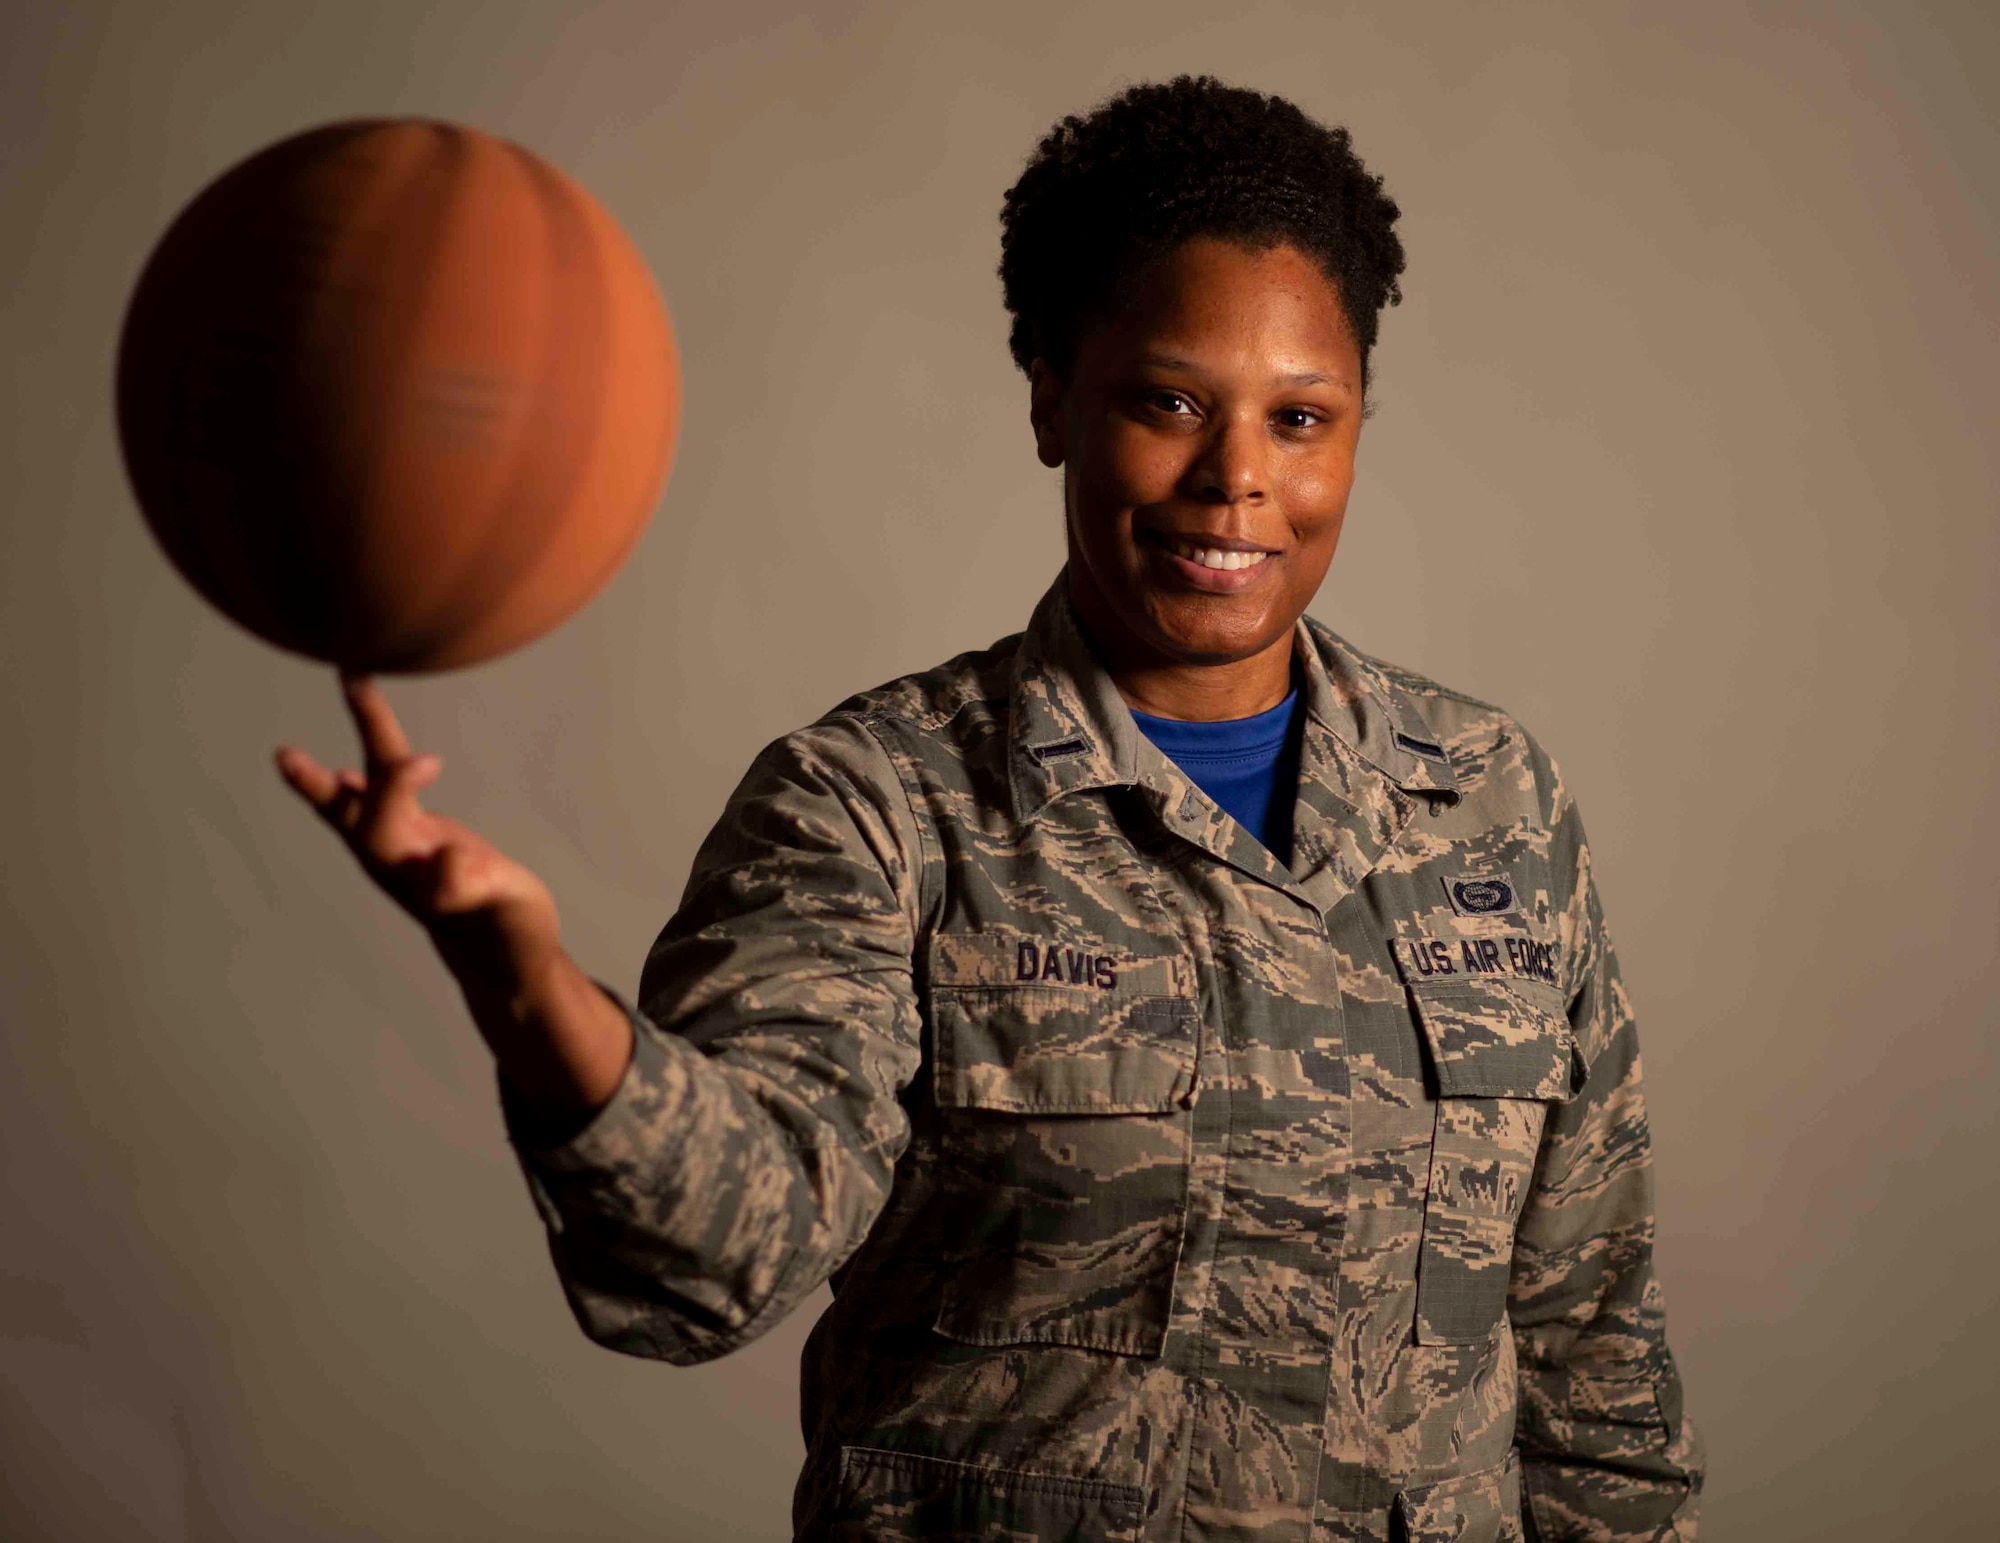 First Lt. Brittnie Davis, Air Mobility Command intelligence officer, shares how hard work and determination helped her achieve her goals of playing basketball and becoming an officer. (Photo by Airman 1st Class Tara Stetler)